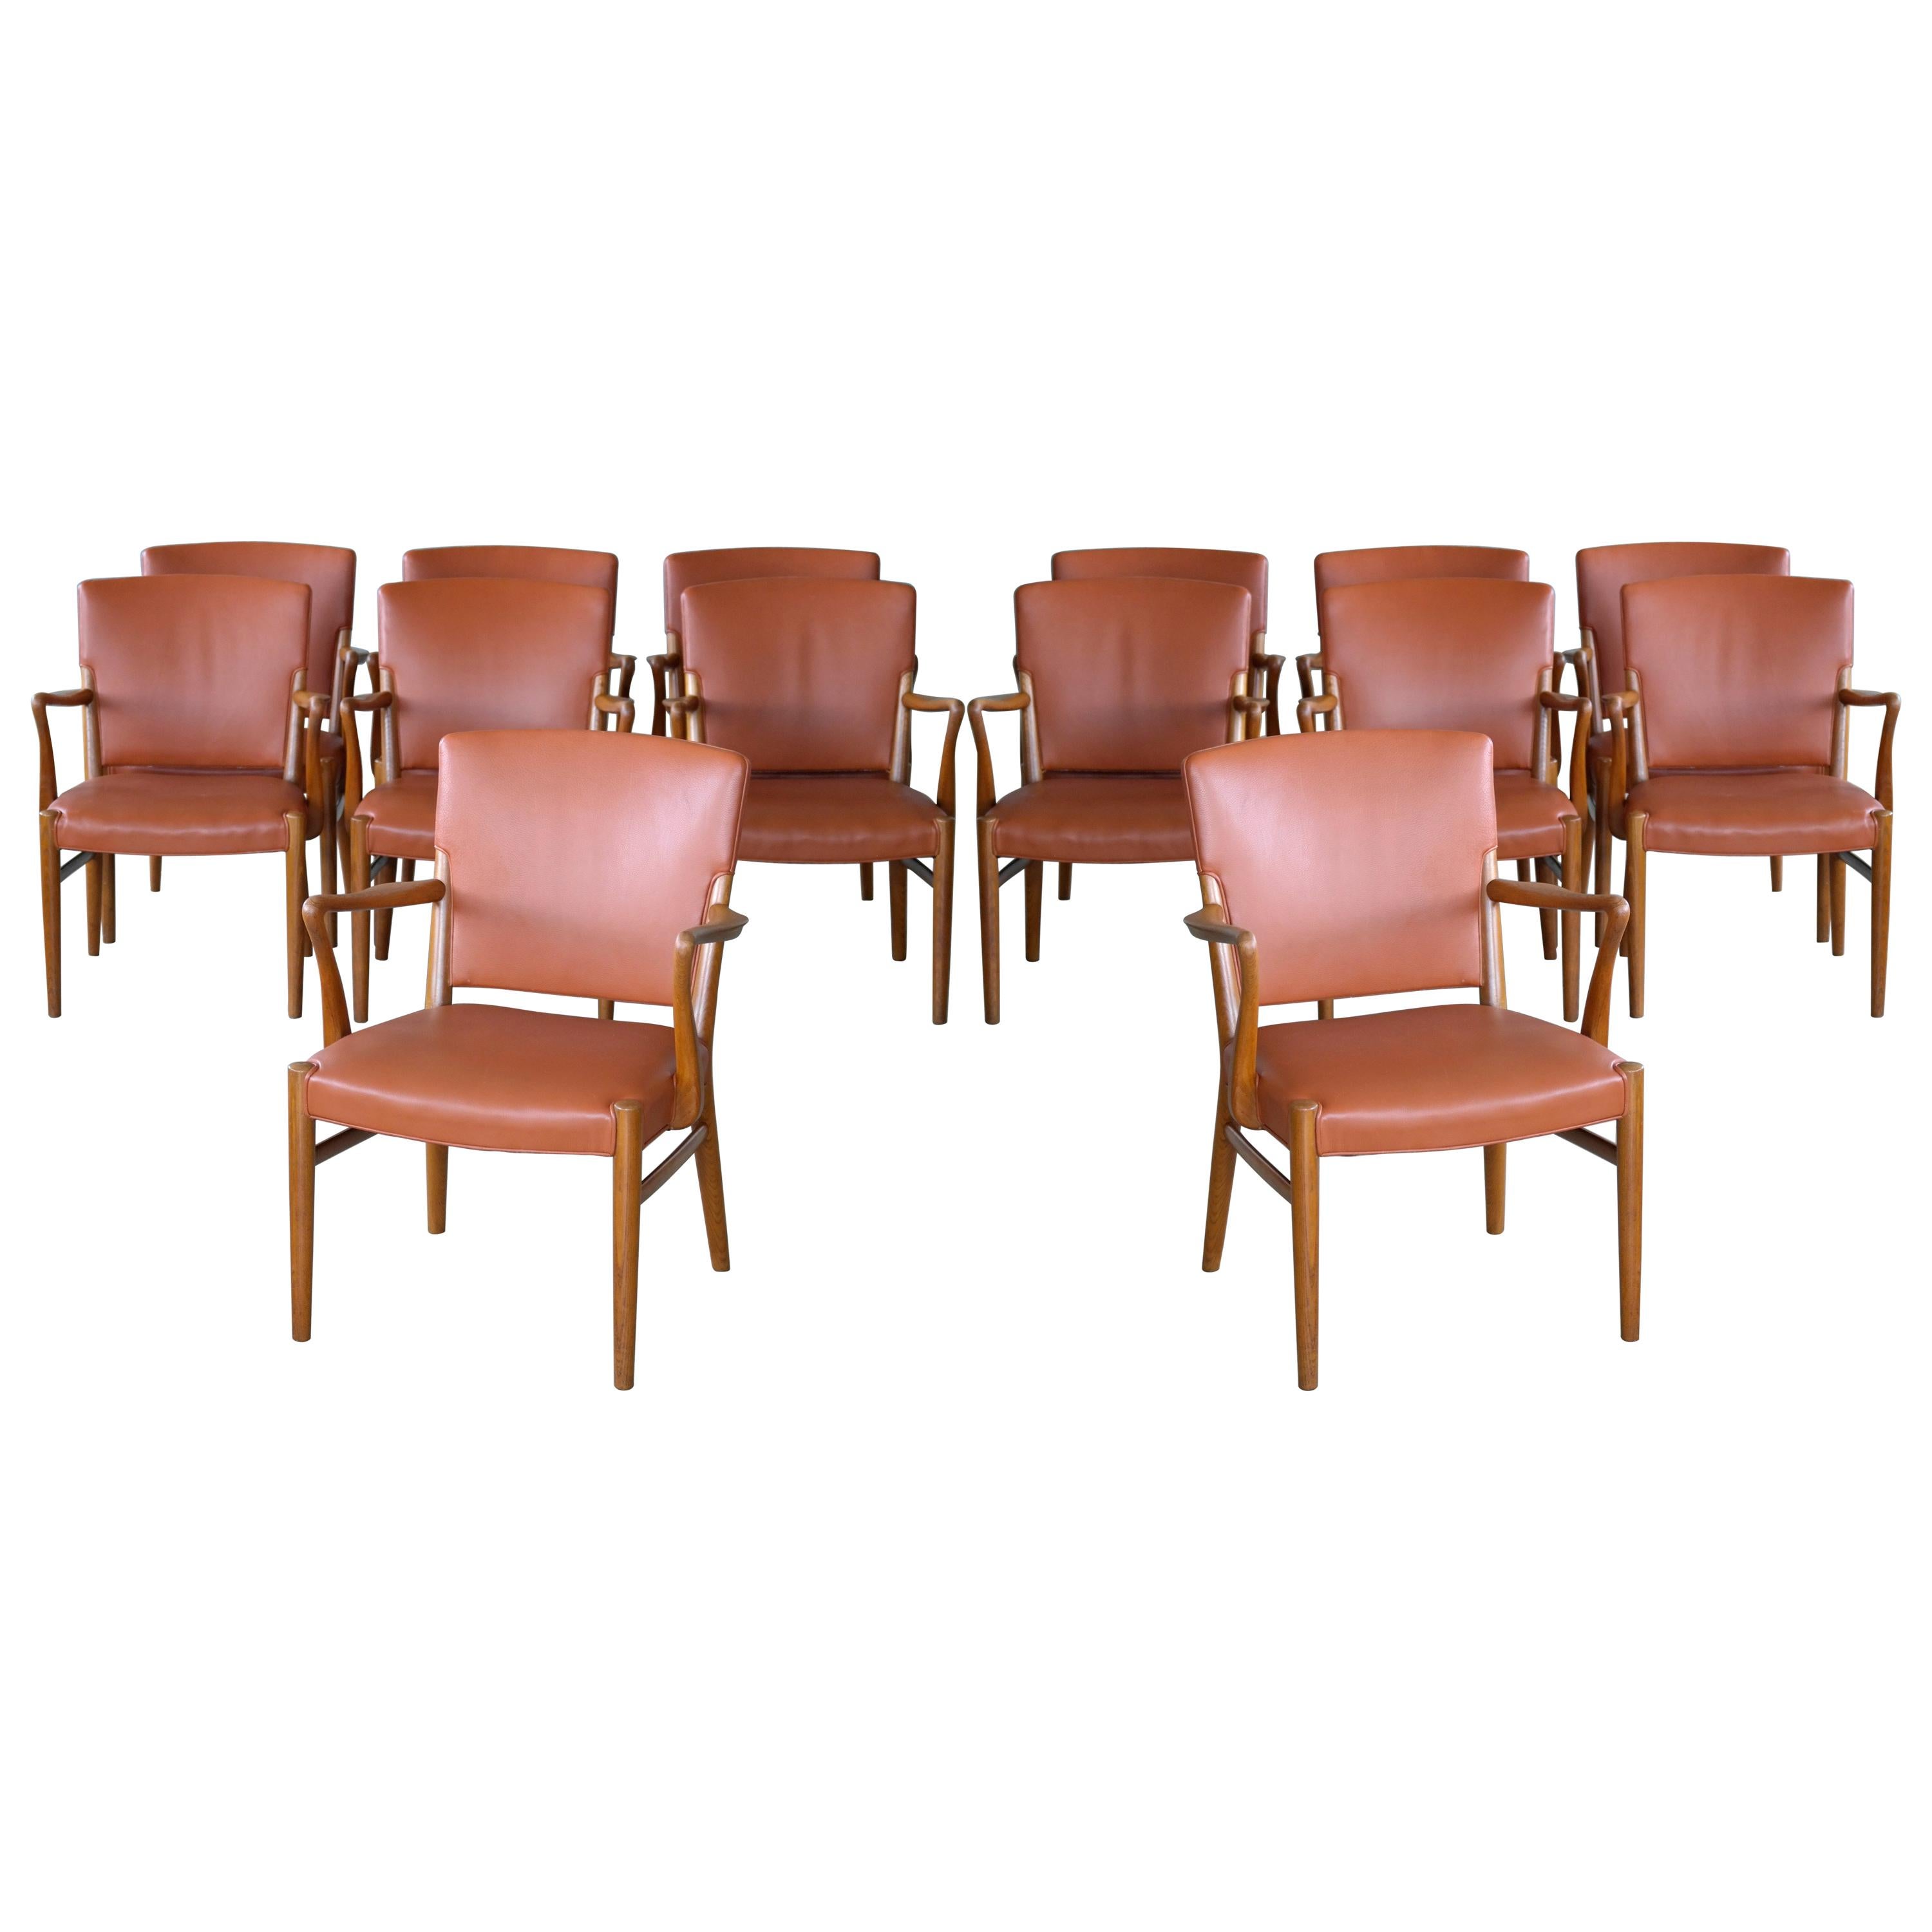 Set of 14 Midcentury Danish Conference/ Dining Chairs  in Elm and Cognac Leather